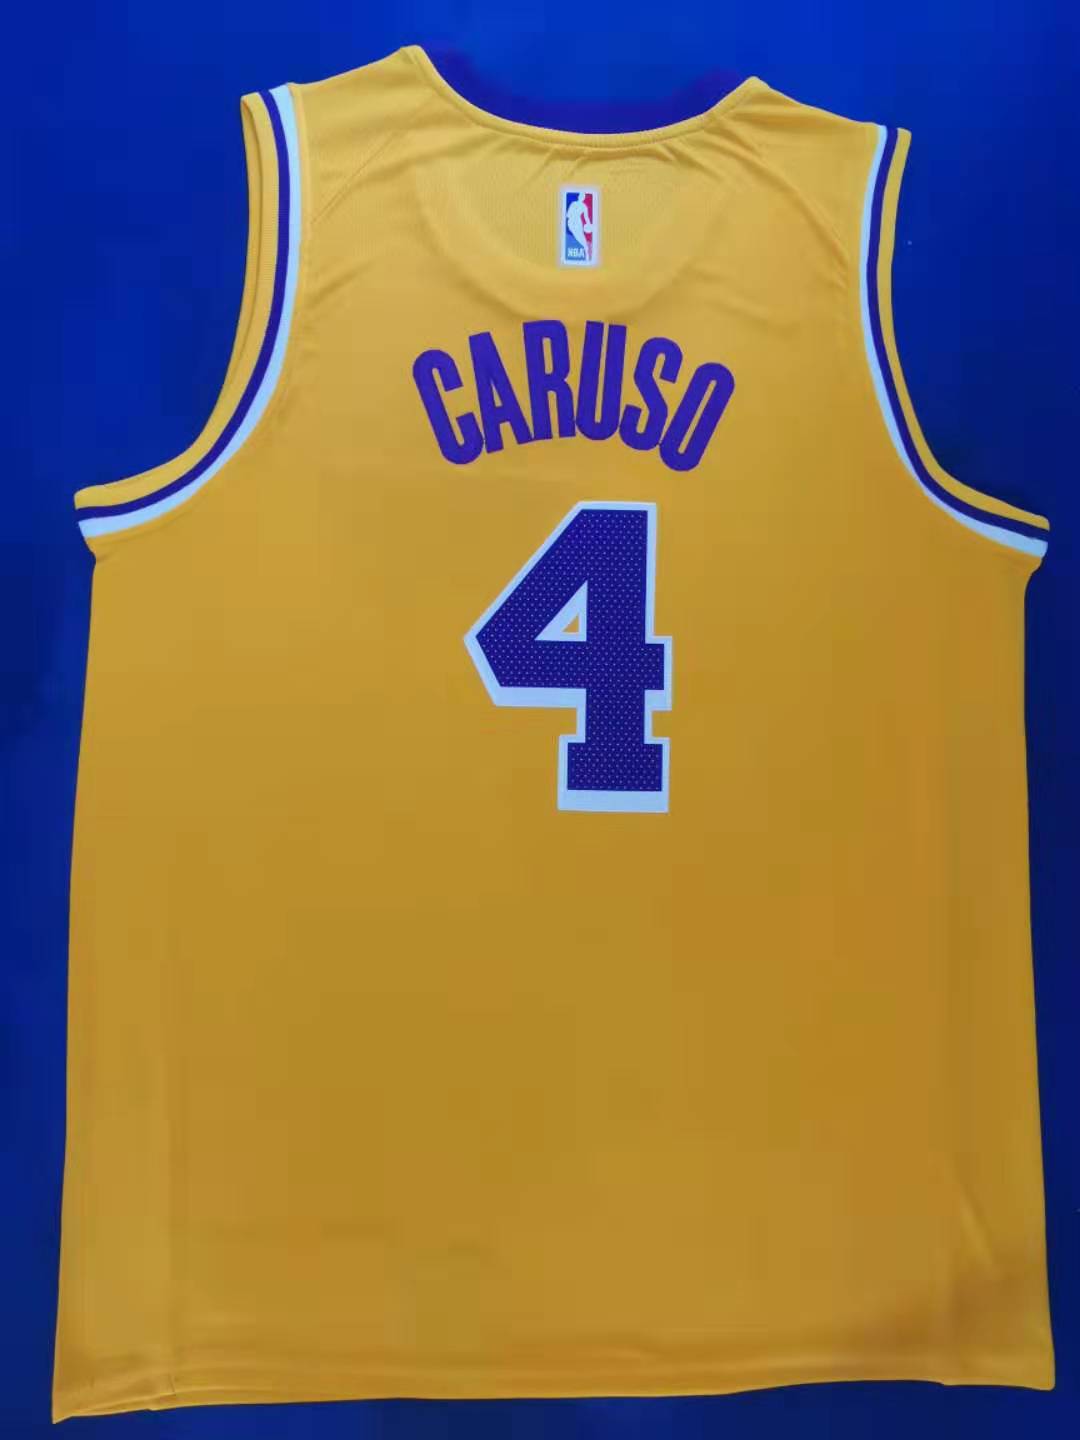 caruso jersey lakers